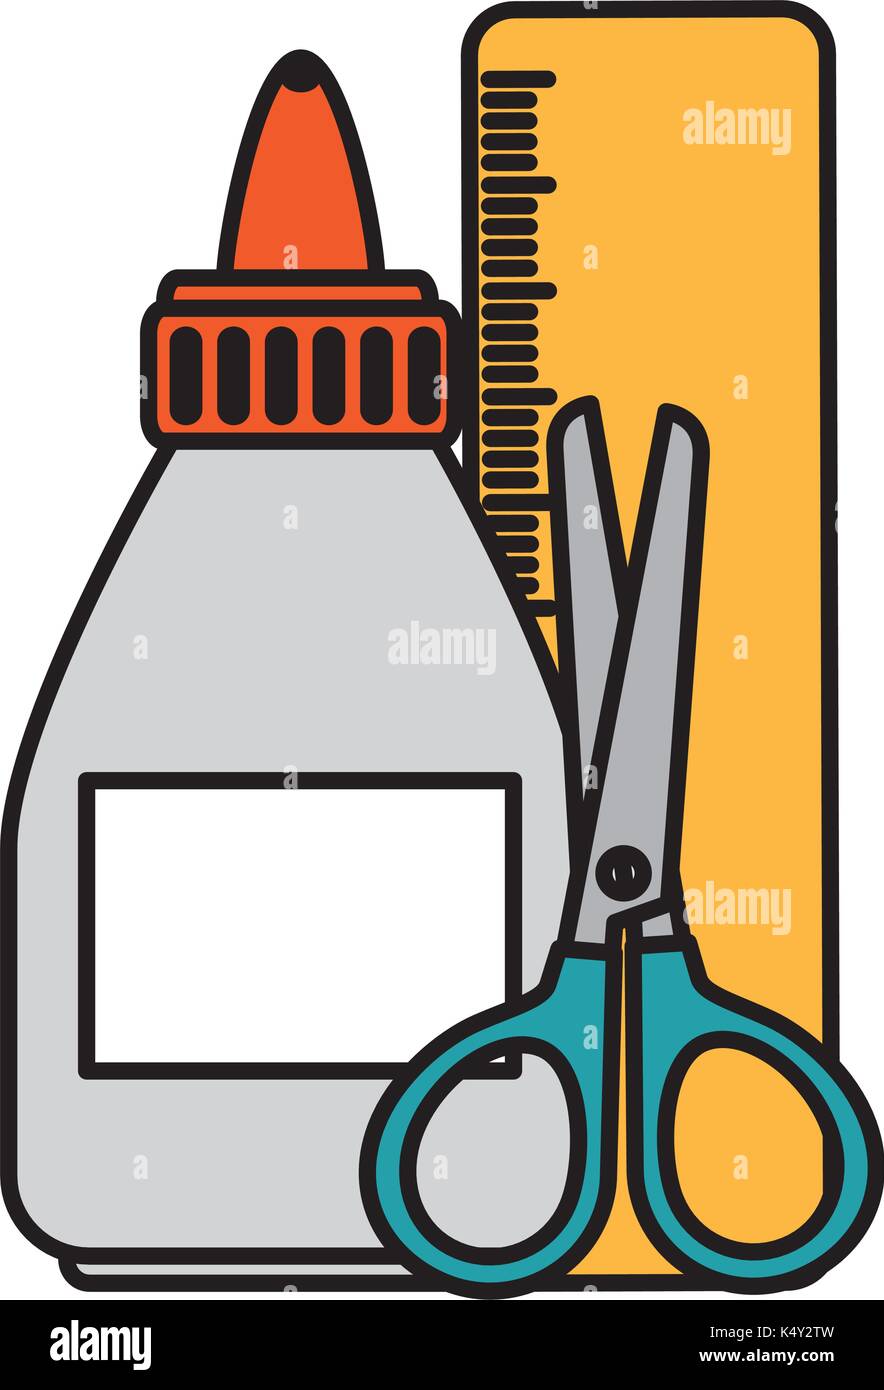 How To Draw A Bottle Of Glue And Scissors 